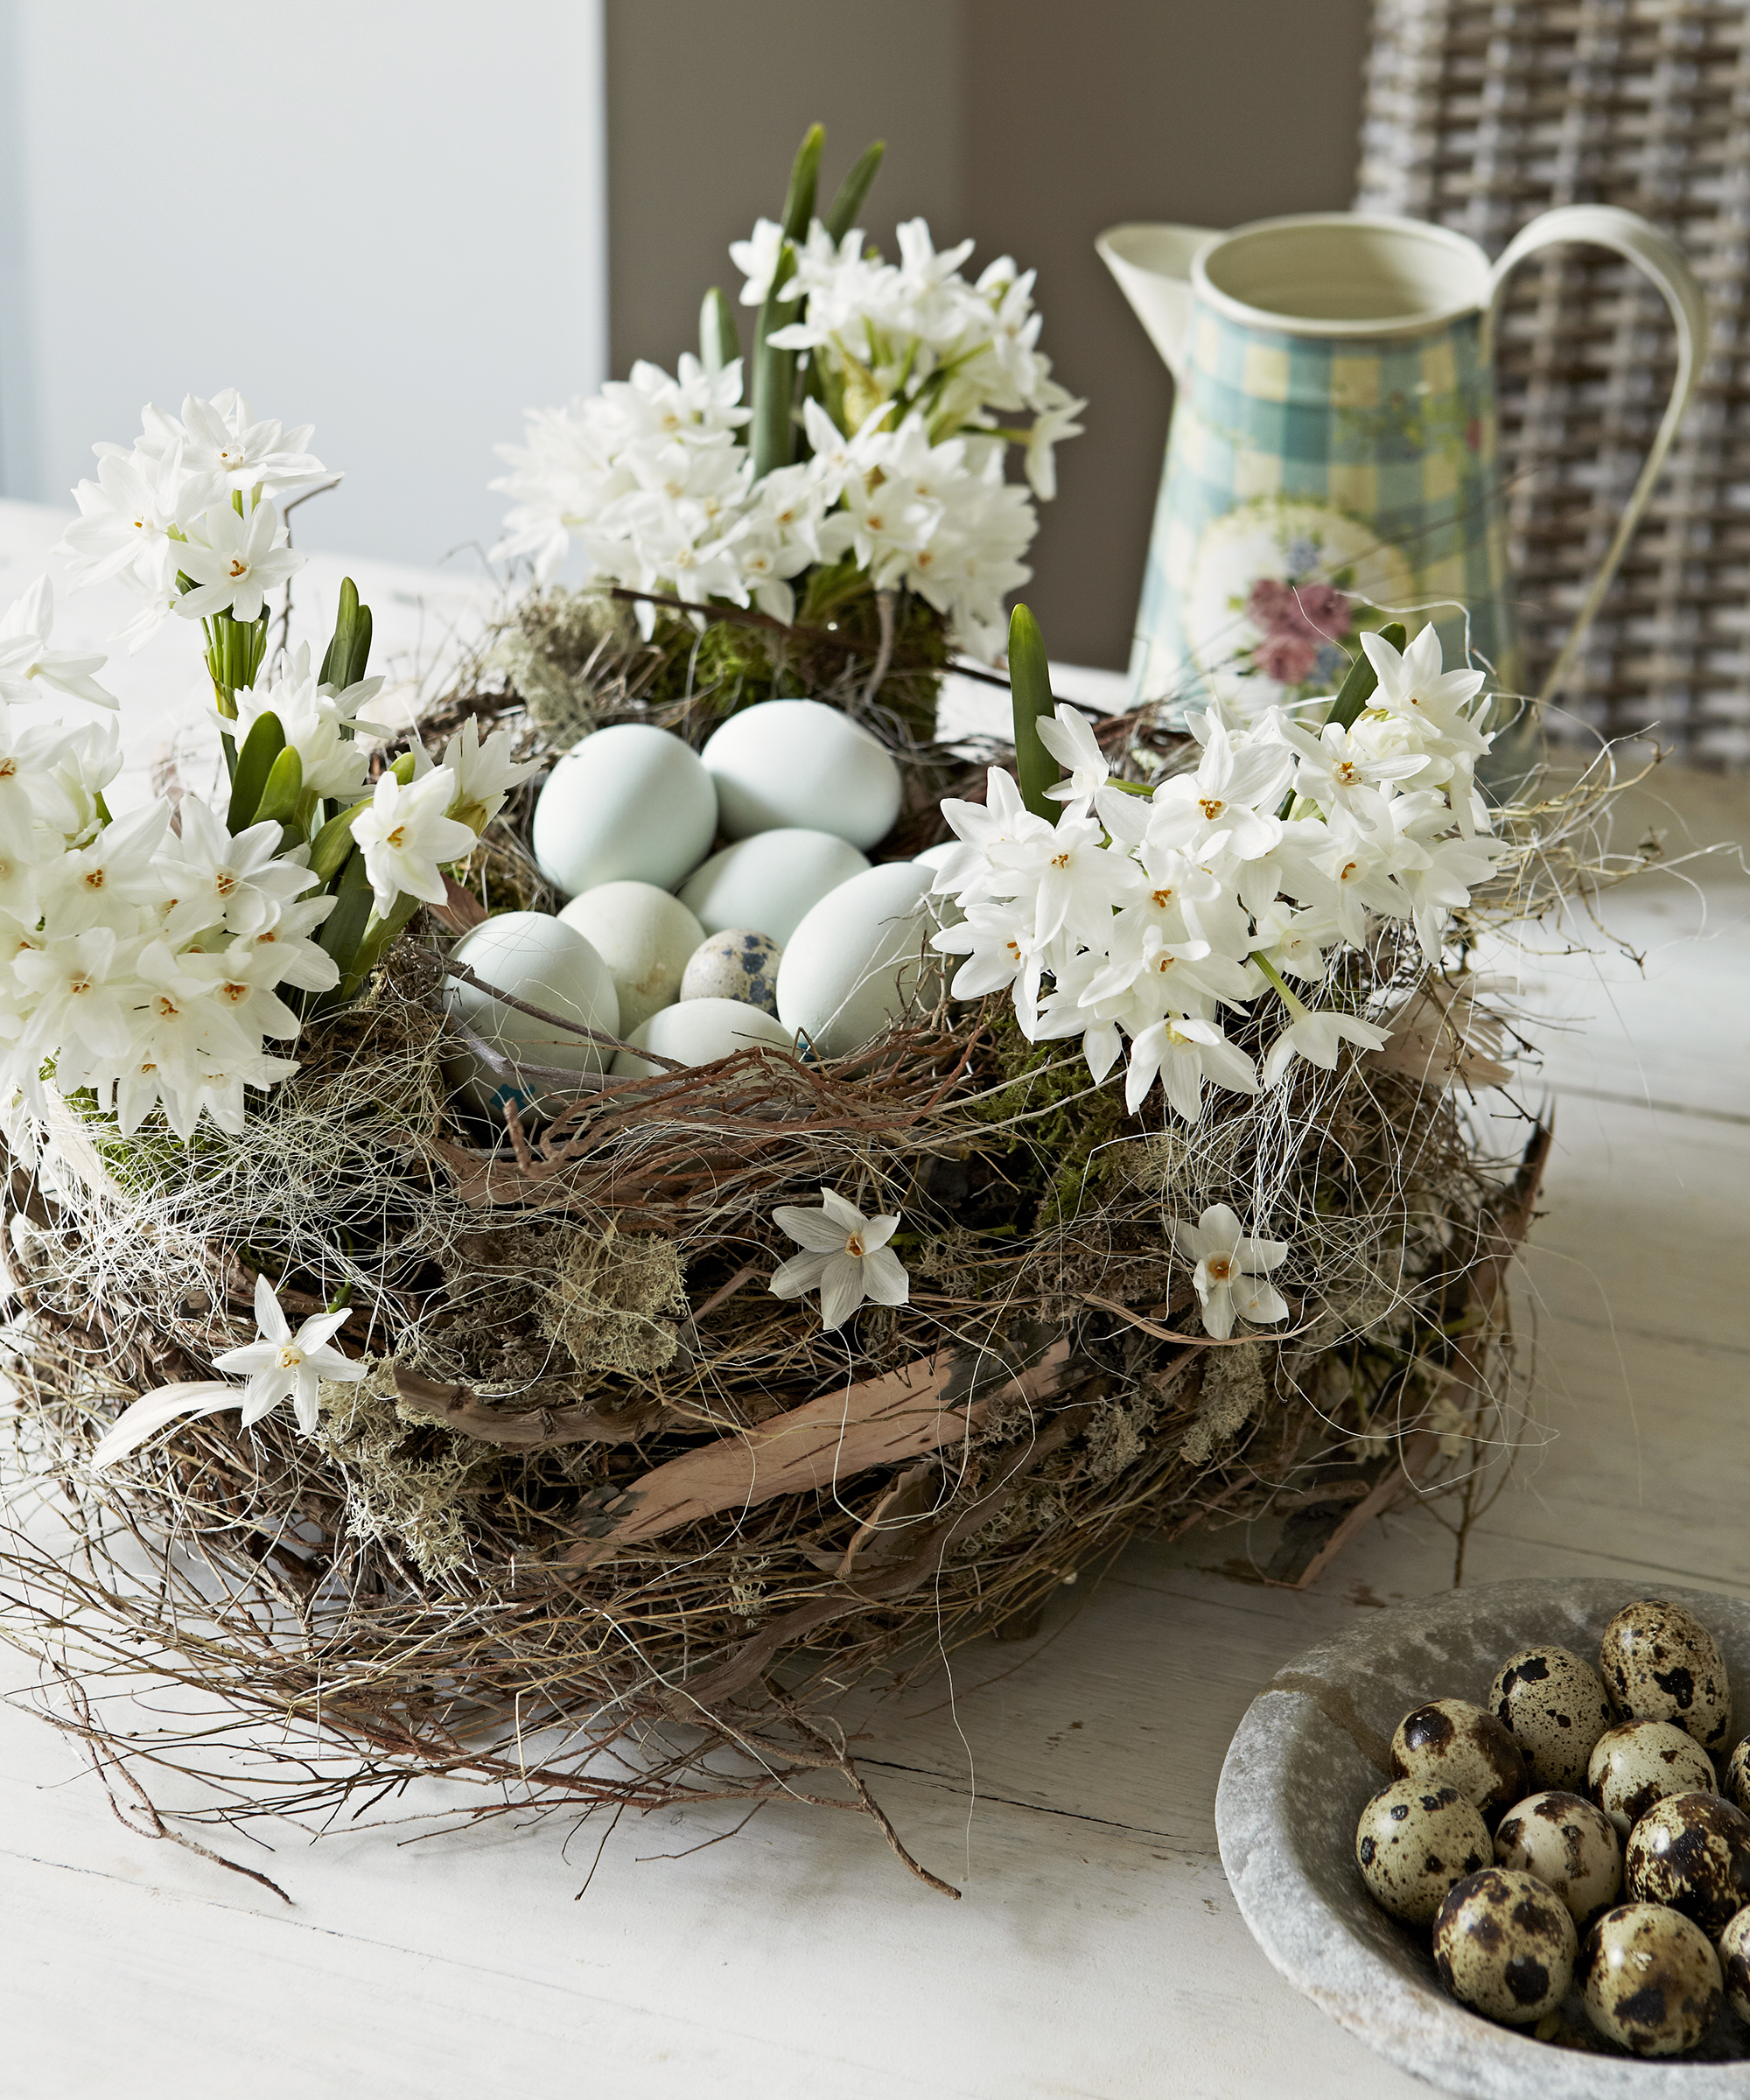 Fake bird's nest with eggs and paperwhites